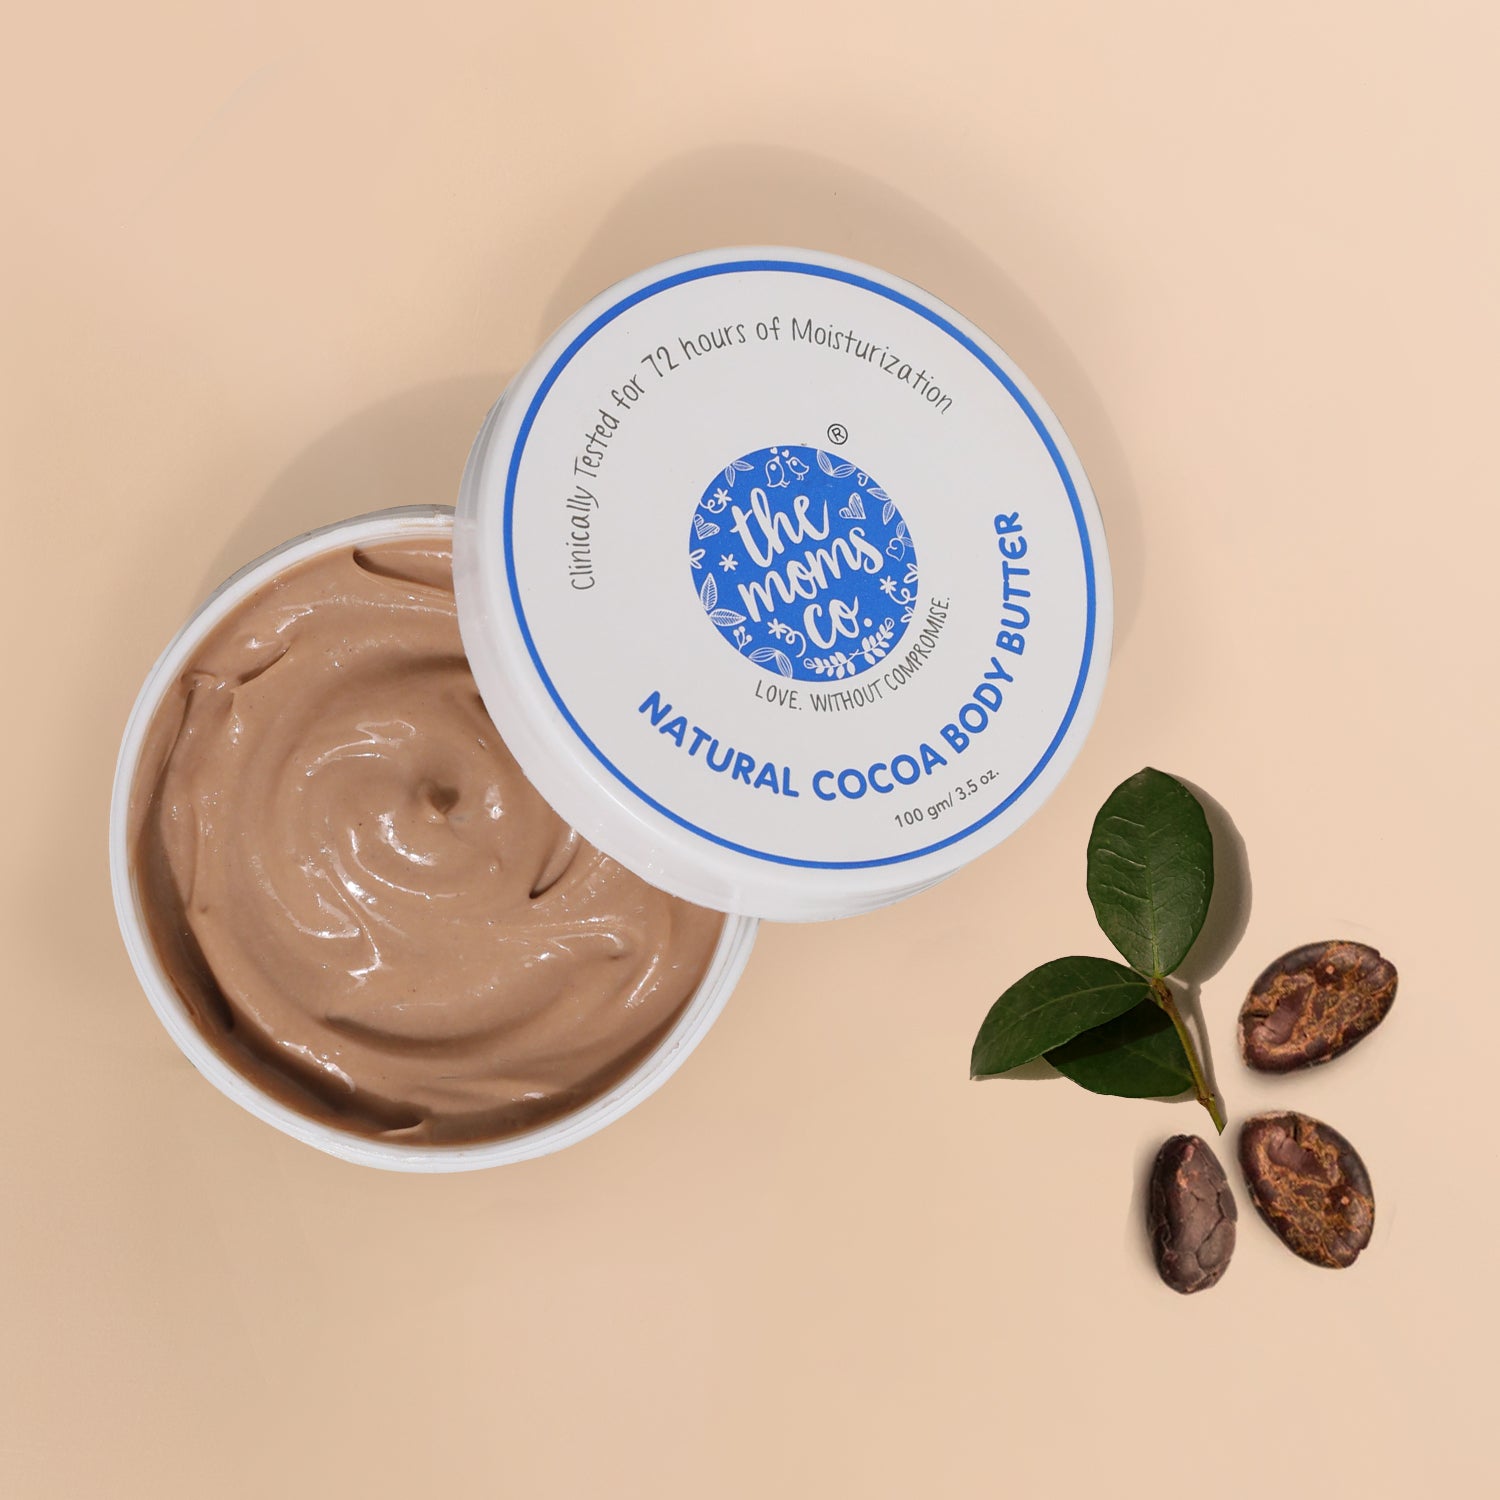 The Moms Co. Natural Cocoa Body Butter - The Ideal Moisturizer for Dry Skin |Moisturizes & Nourishes Skin | With Shea & Cocoa Butters-100 Gm